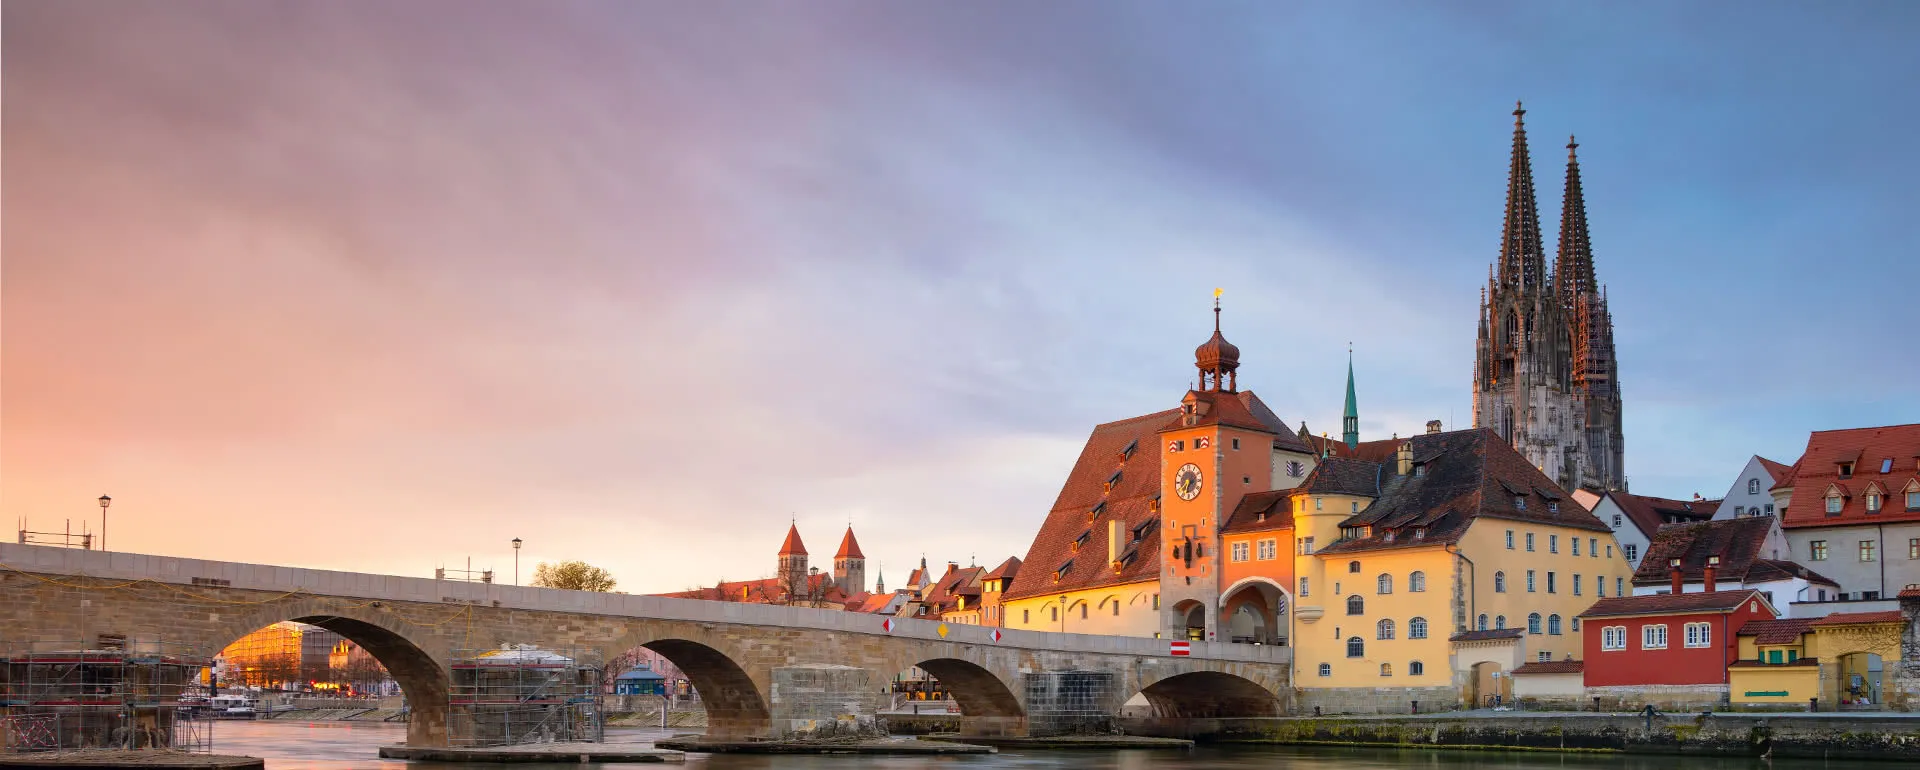 Regensburg - the destination with youth hostels